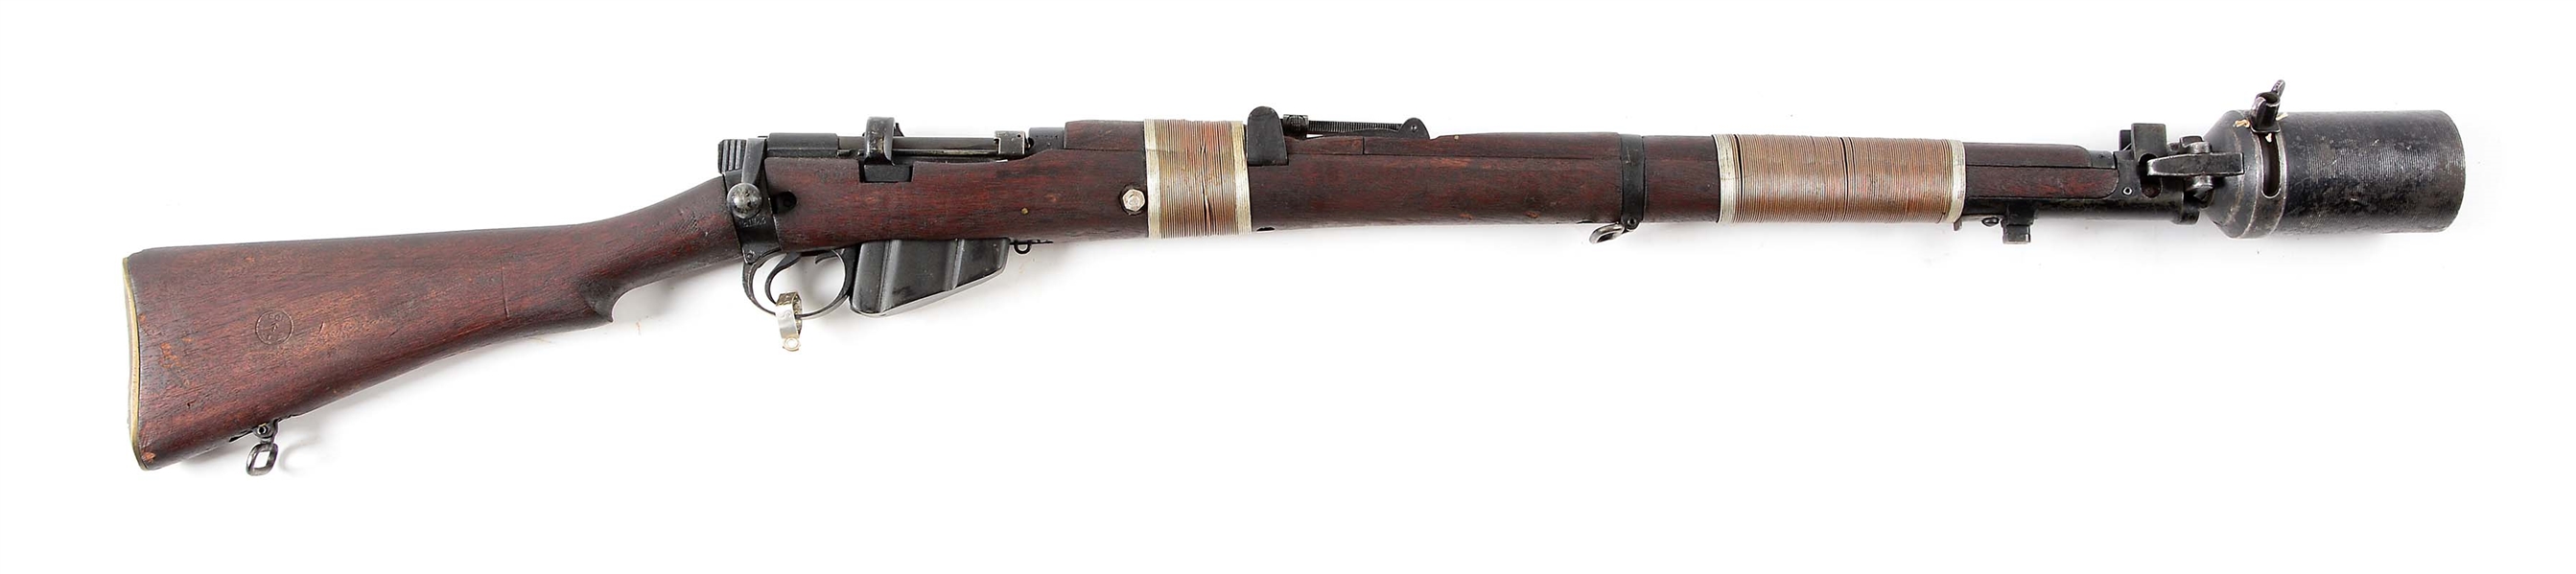 (C) INDIAN ENFIELD NO. 1 MK III* BOLT ACTION .303 RIFLE WITH GRENADE DISCHARGER.